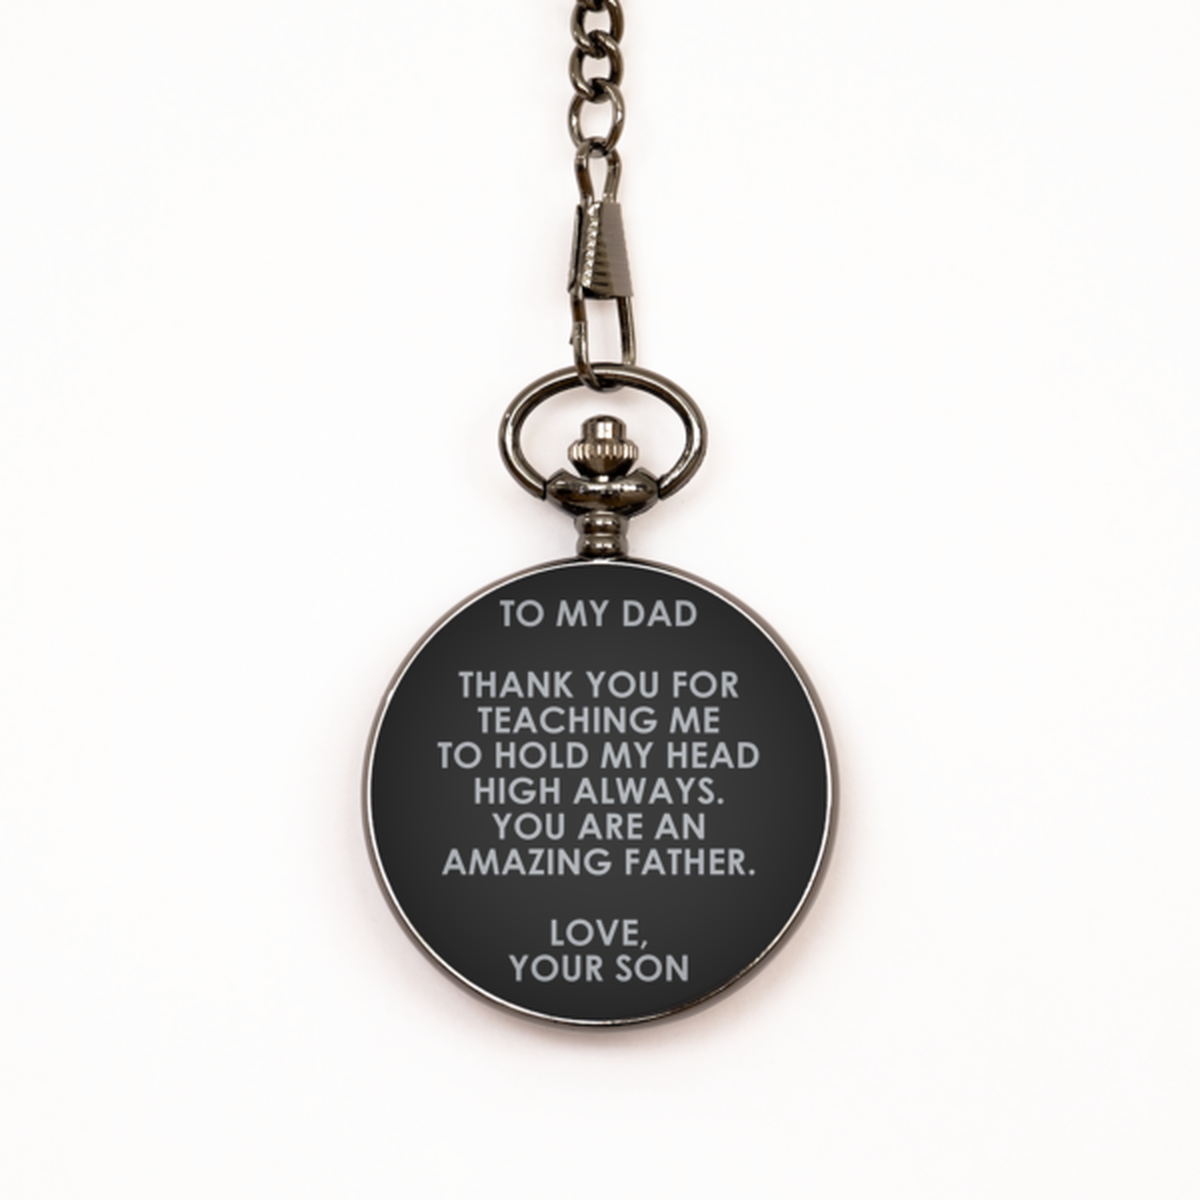 To My Dad Black Pocket Watch, You Are An Amazing Father, Fathers Day Gifts For Dad From Son, Birthday Gifts For Men